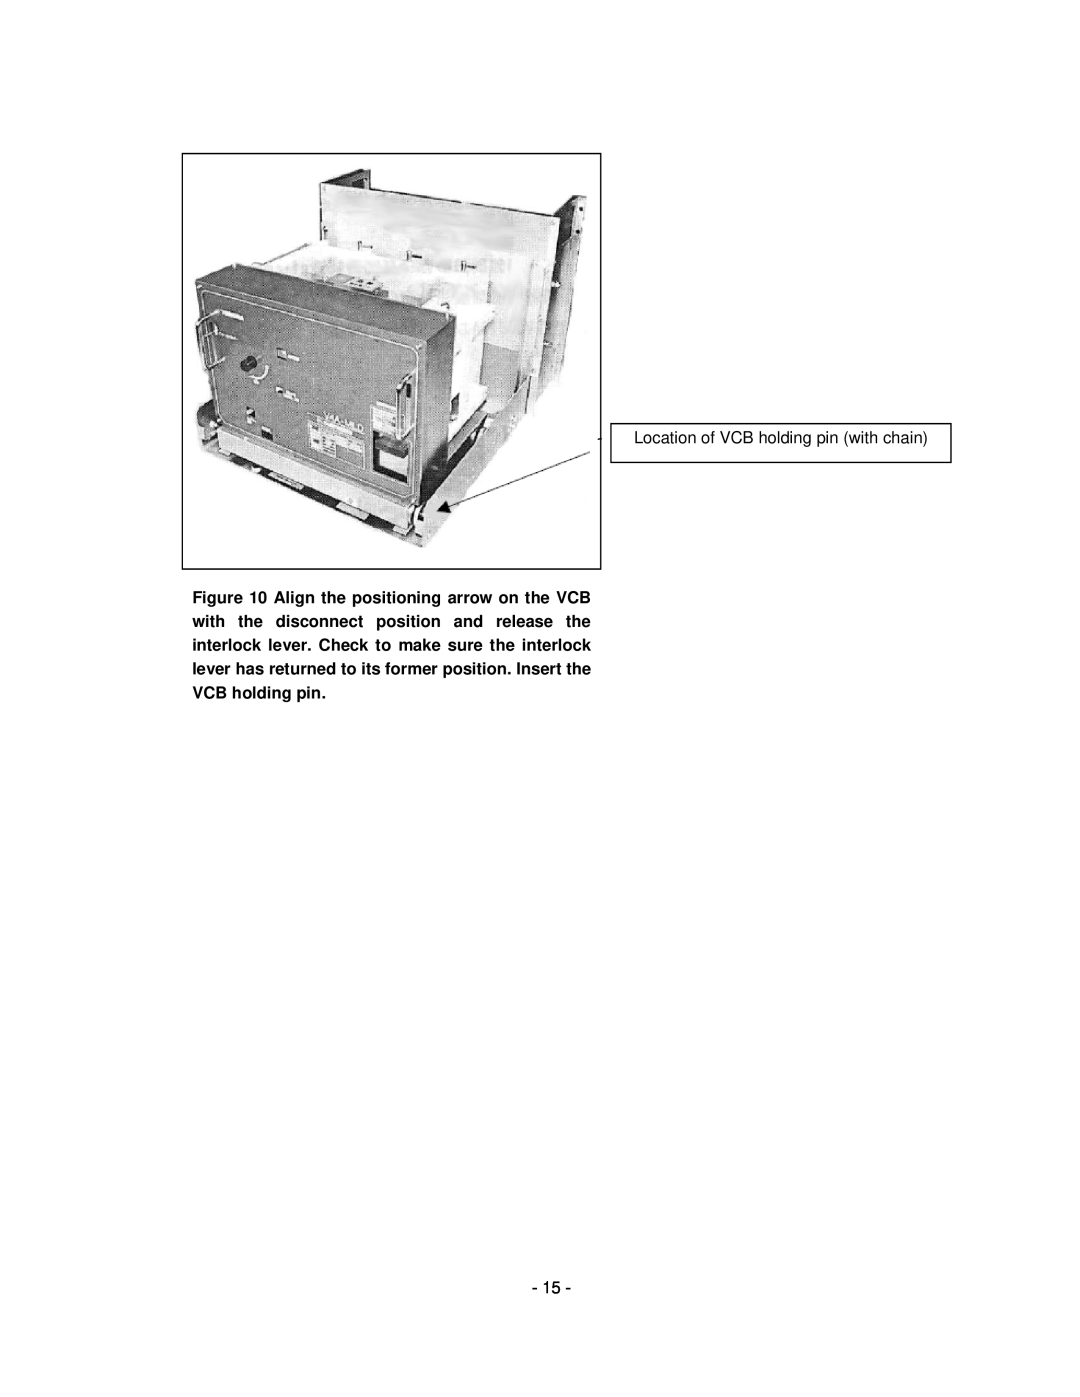 Toshiba H6A-HLS, HV6CS-MLD operation manual Location of VCB holding pin with chain 